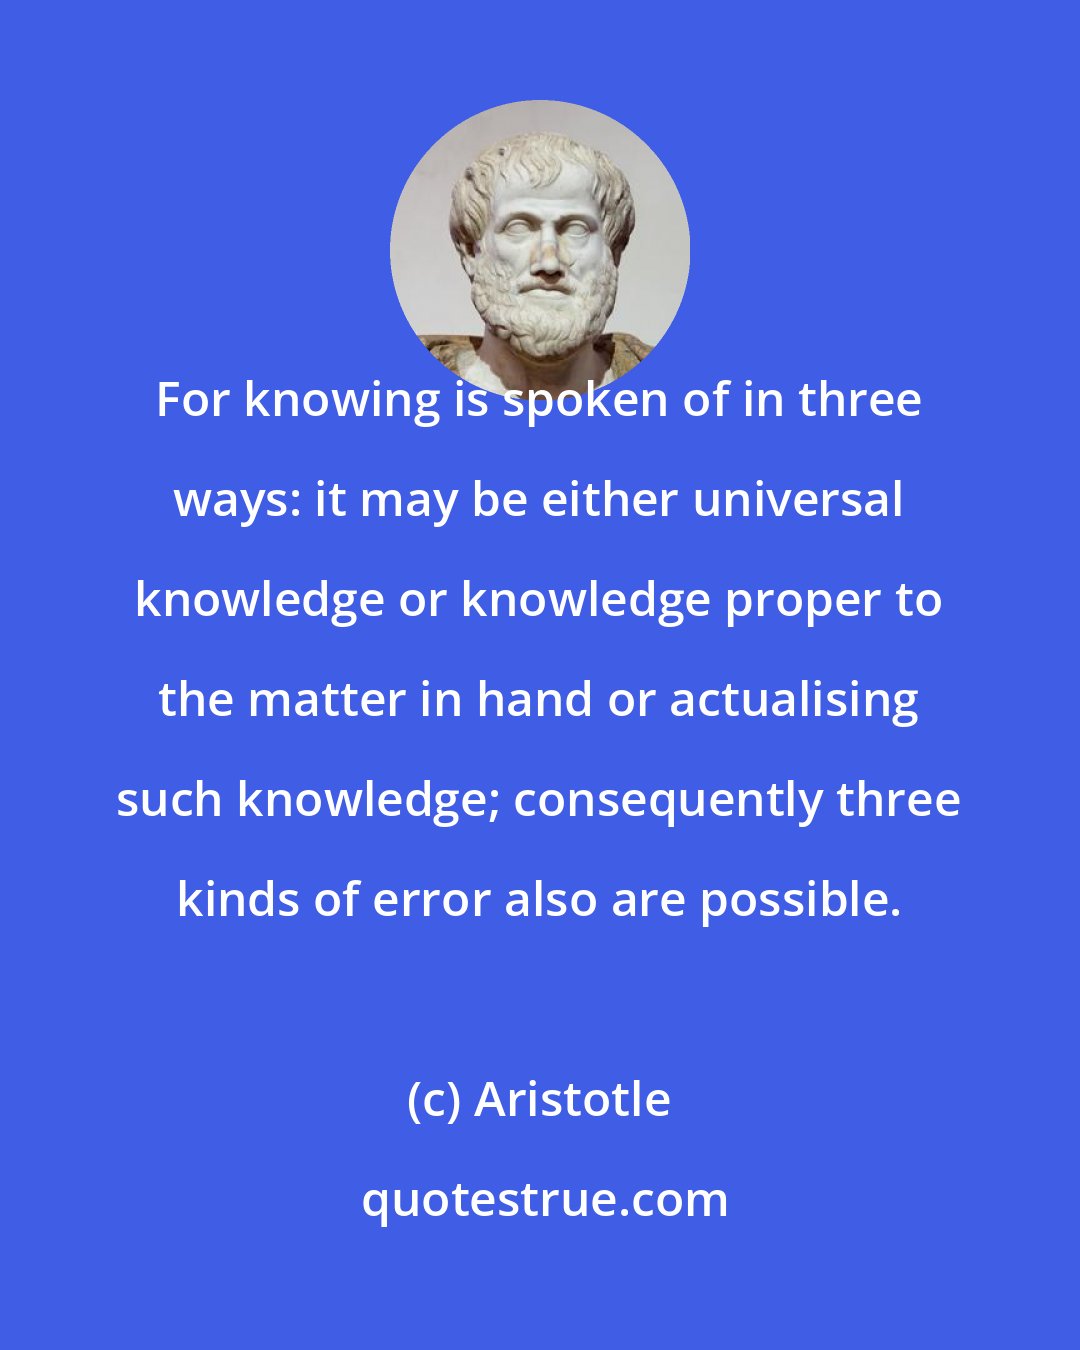 Aristotle: For knowing is spoken of in three ways: it may be either universal knowledge or knowledge proper to the matter in hand or actualising such knowledge; consequently three kinds of error also are possible.